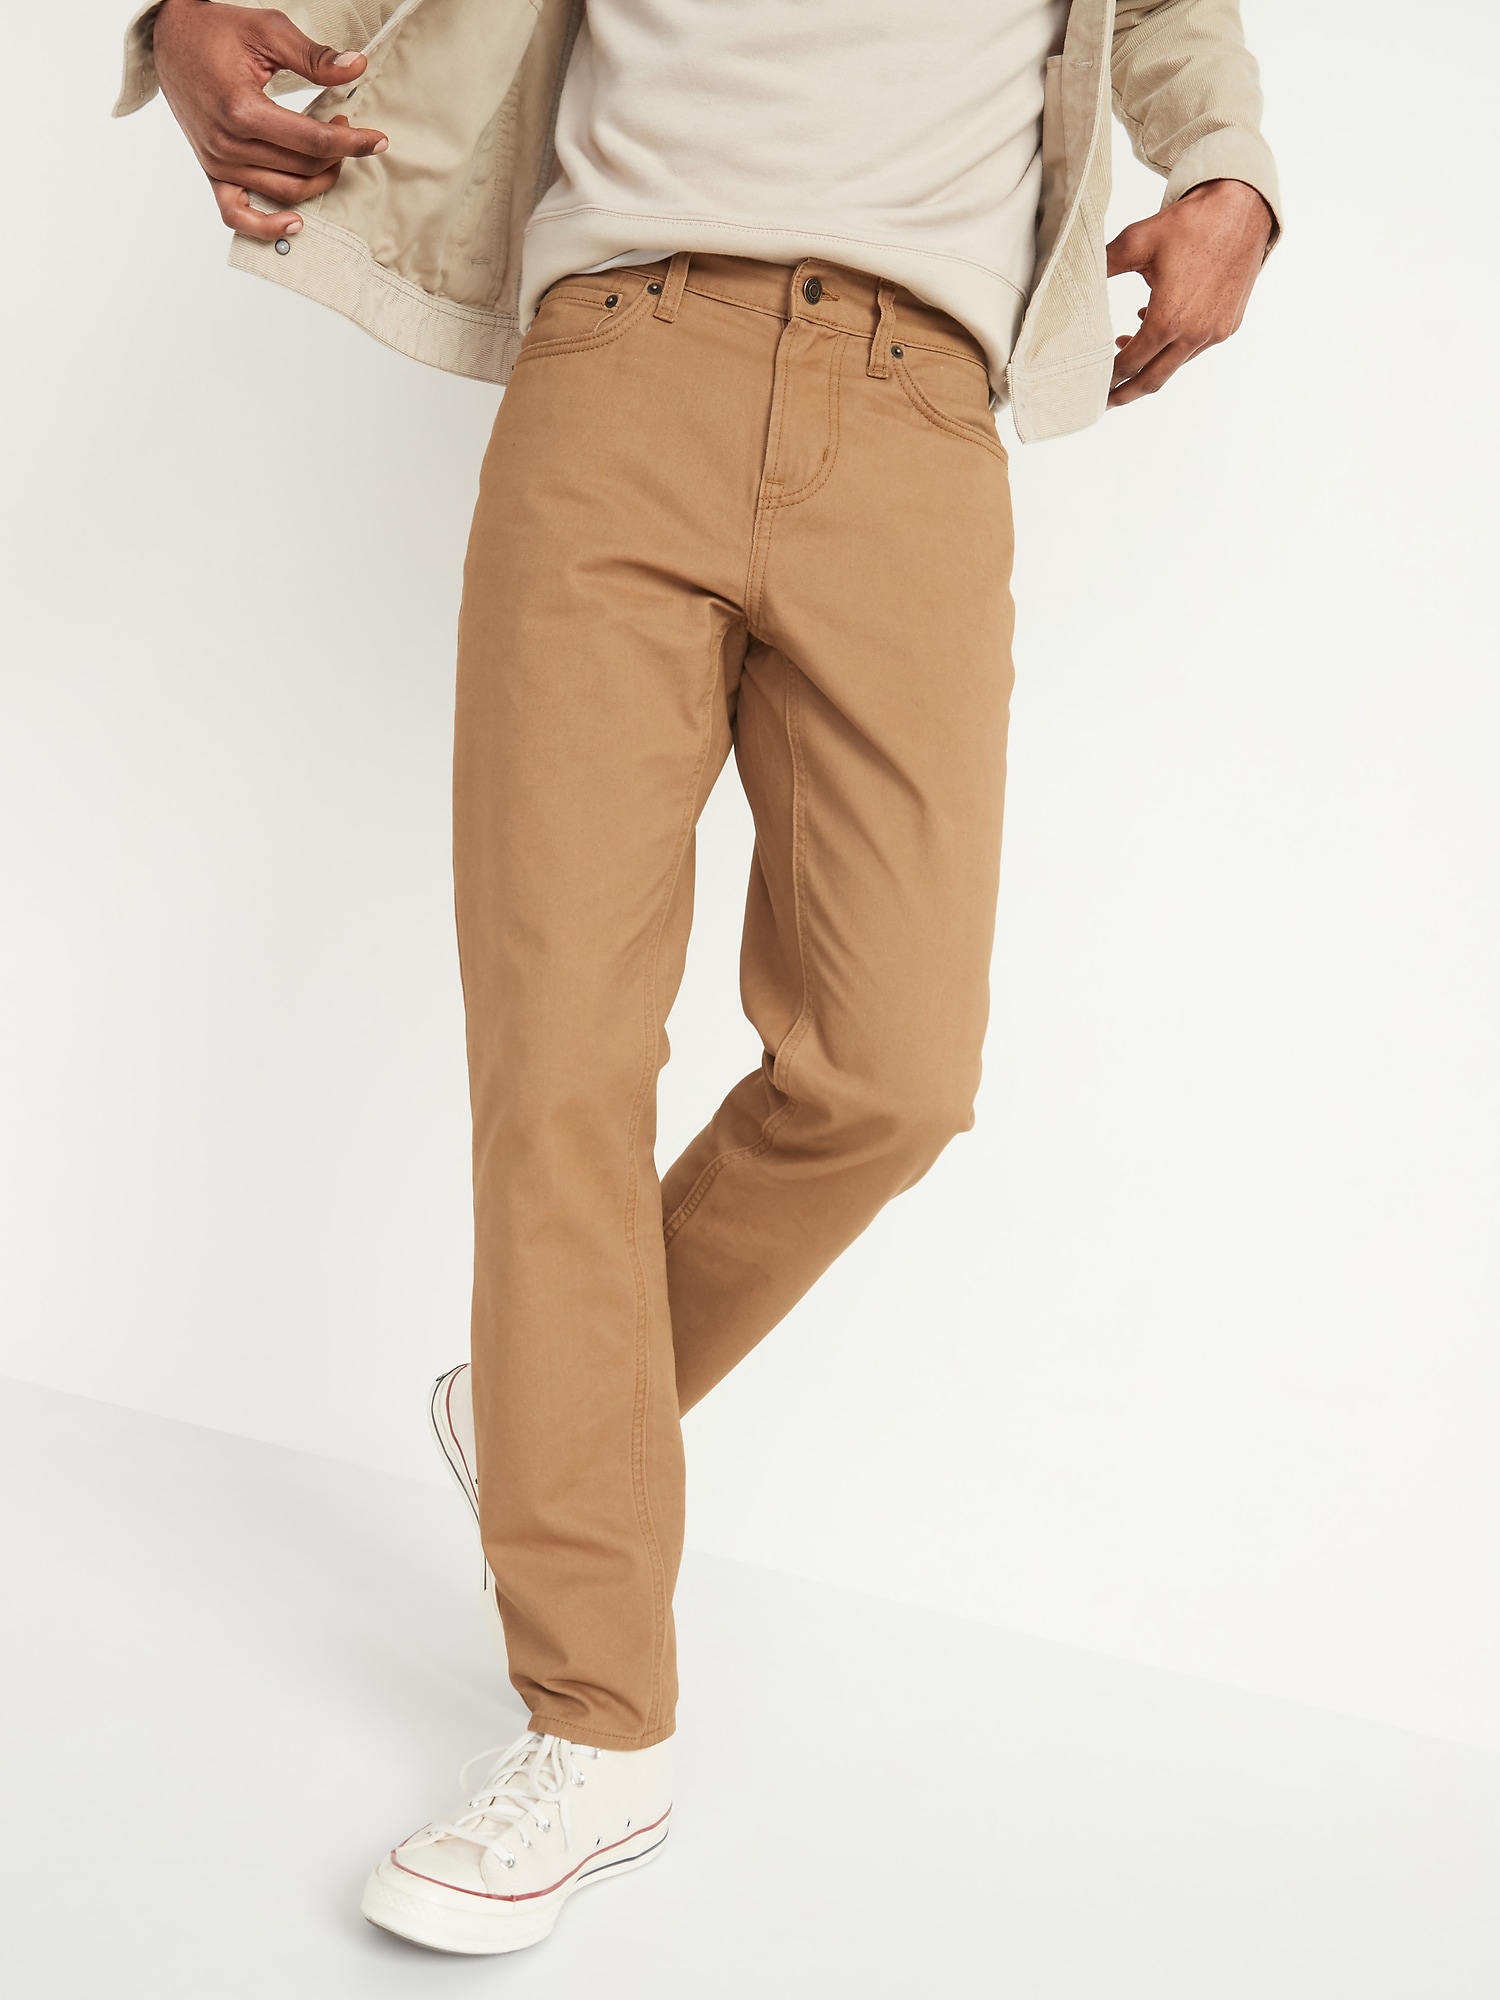 Athletic Taper Non-Stretch Twill Five-Pocket Pants for Men